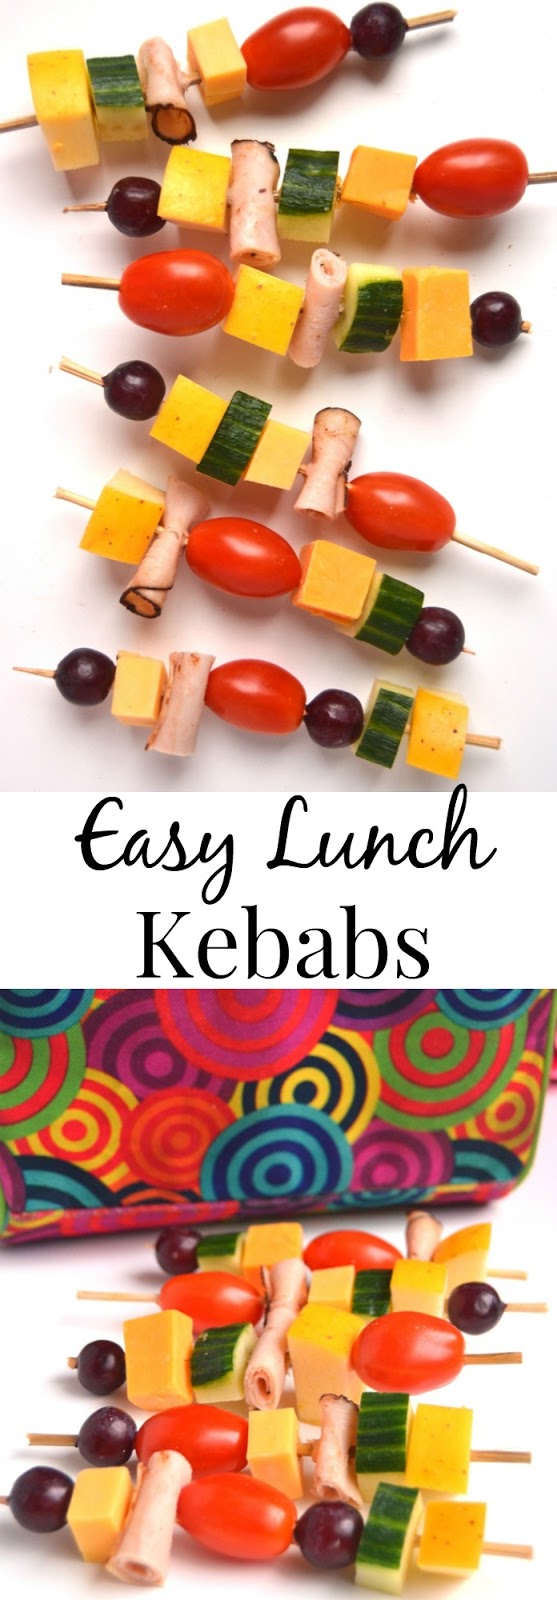 Easy Lunch Kebabs are customizable based on what you have on hand and are sure to be a lunchtime favorite for both kids and adults! Use your favorite fruits, vegetables, lunch meats and cheeses. www.nutritionistreviews.com